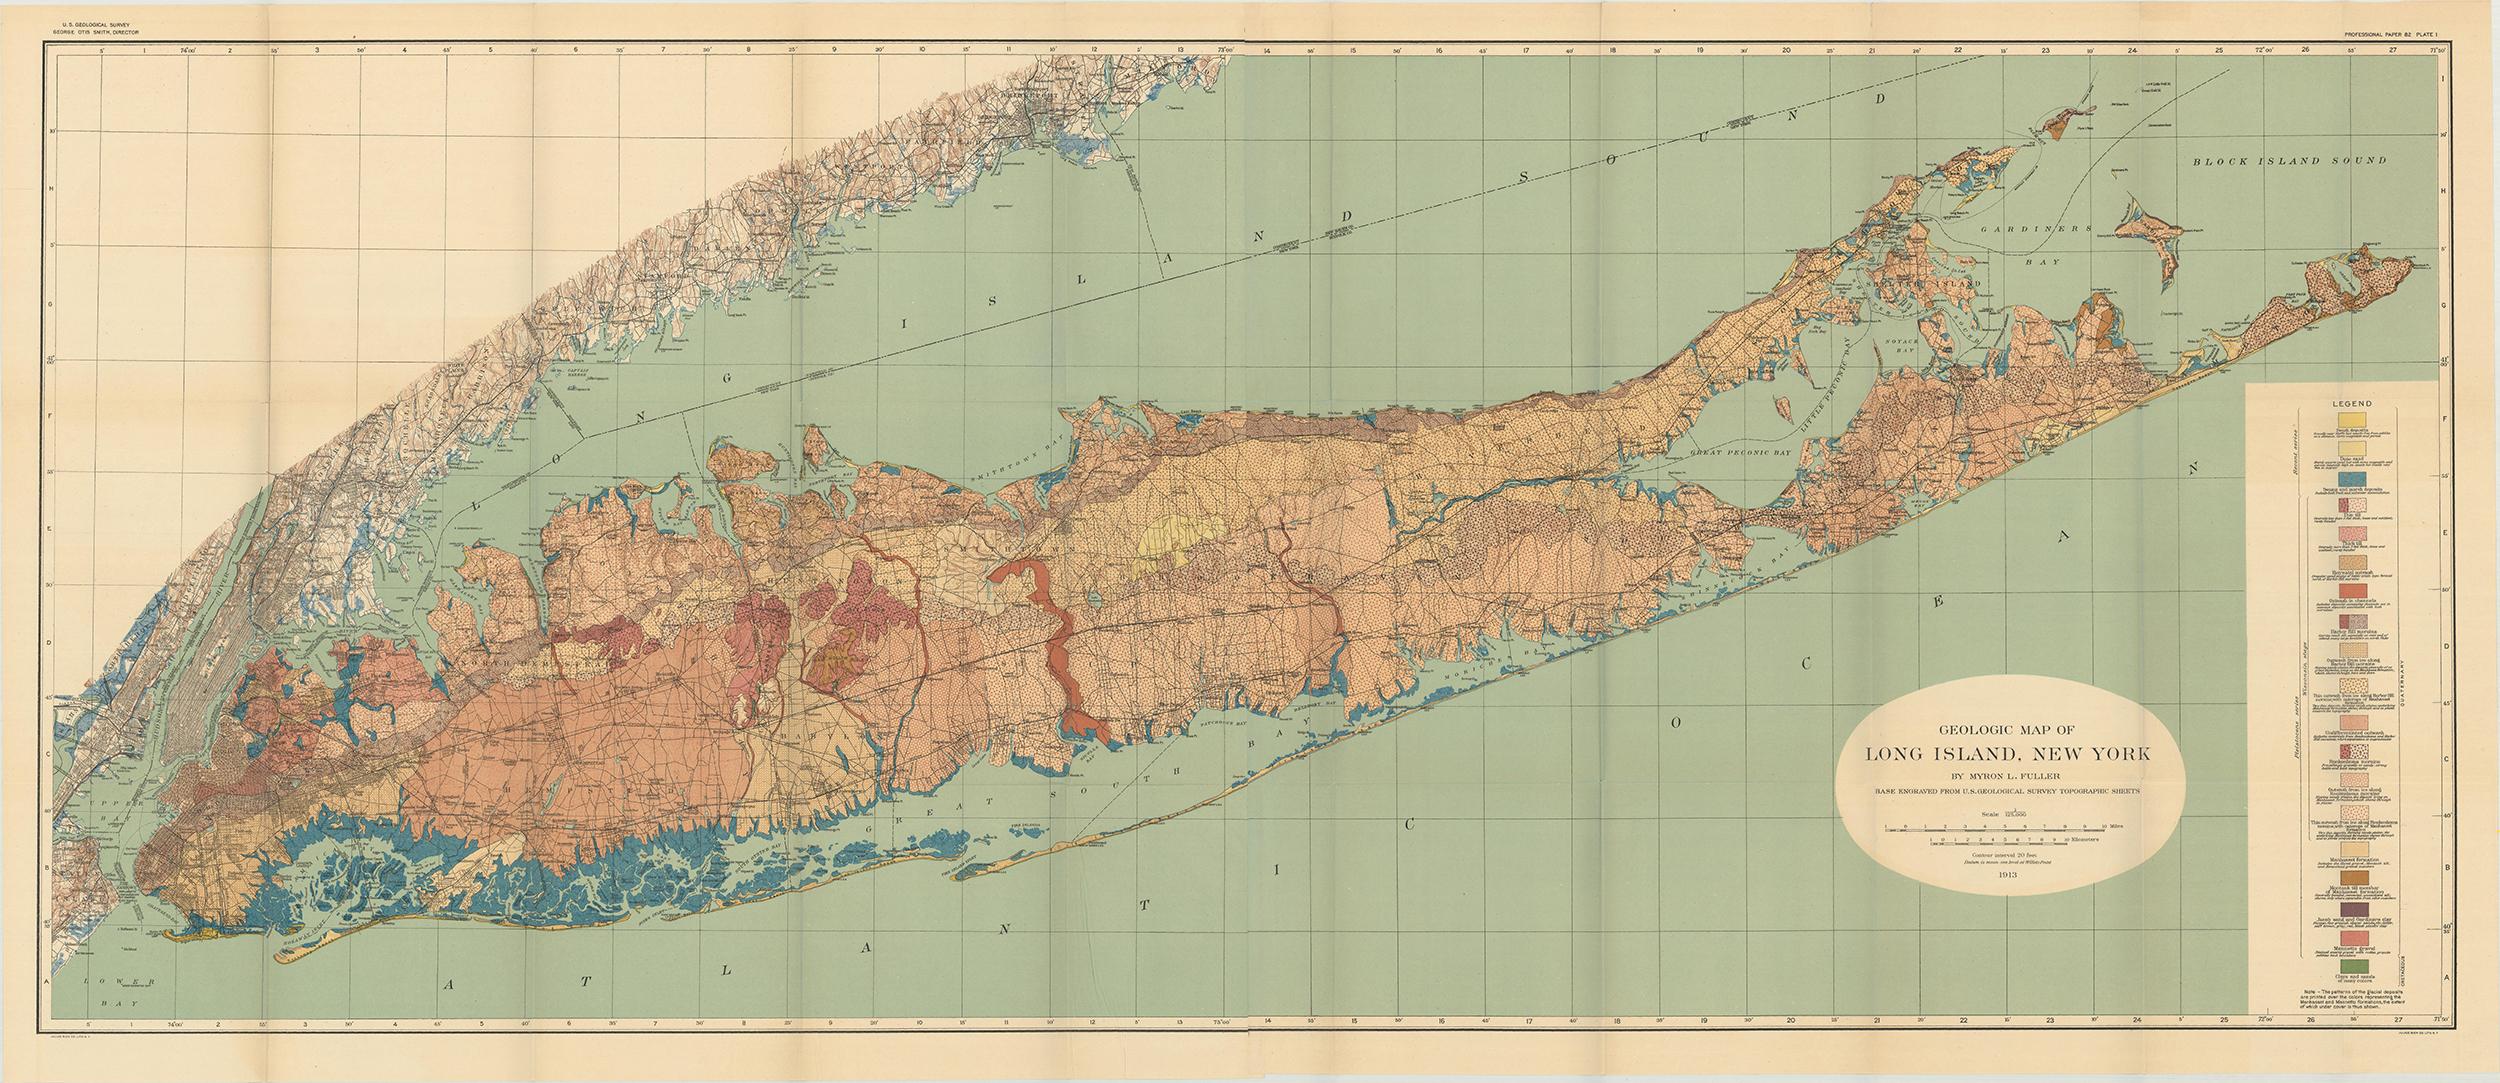 This listing included a book and two maps of Long Island:

1) Myron Fuller's report on the Geology of Long Island, published as Professional Paper 82, contains scores of line drawings, black and white photographs and small maps.

2) Topographic